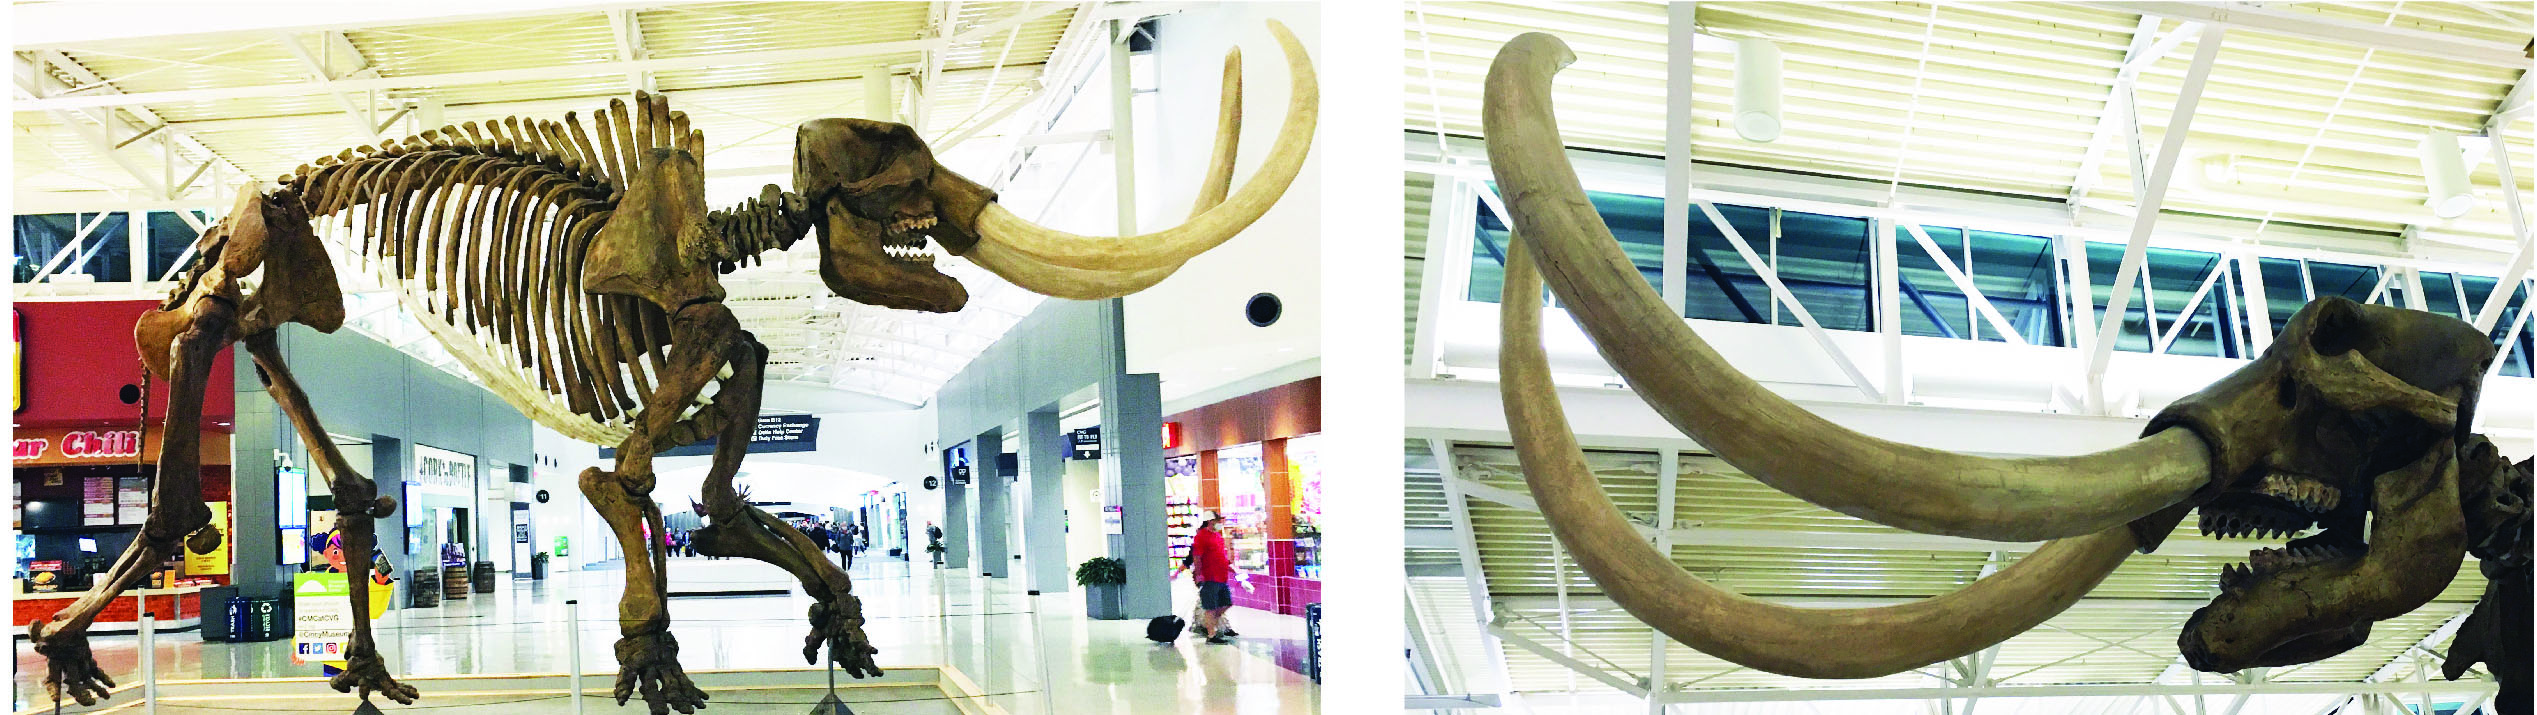 Replica of mastodon skeleton on display in the Delta wing at the Cincinnati and northern Kentucky international airport from the Cincinnati Museum Center.